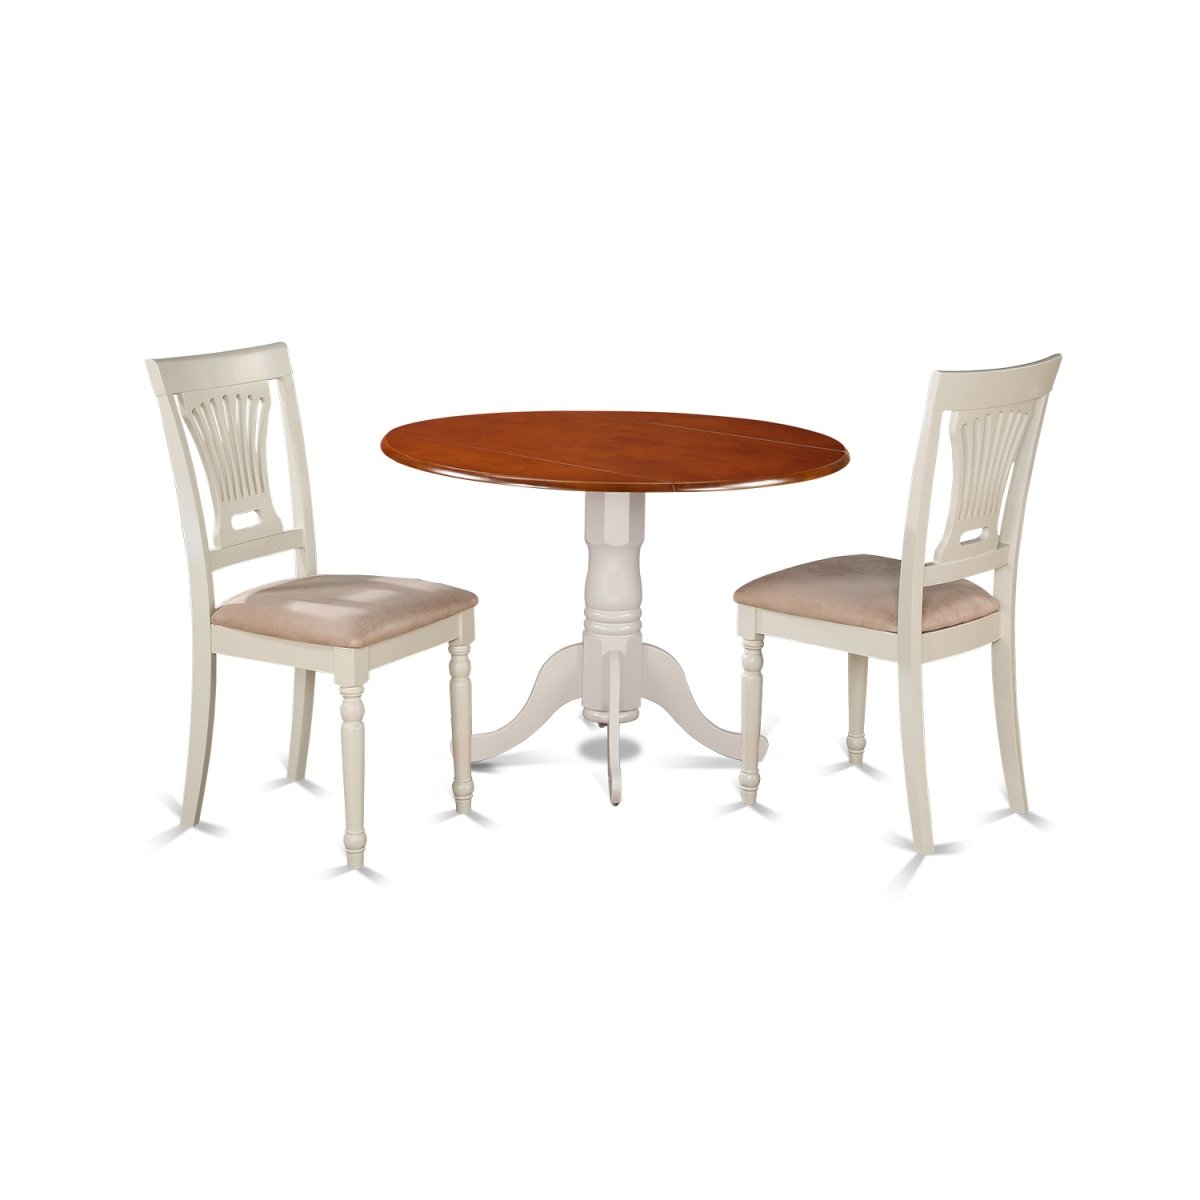 Picture of East West Furniture DLPL3-BMK-C Dublin Kitchen Table Set - Dining Table & 2 Wooden Chairs, Buttermilk & Cherry - 3 Piece